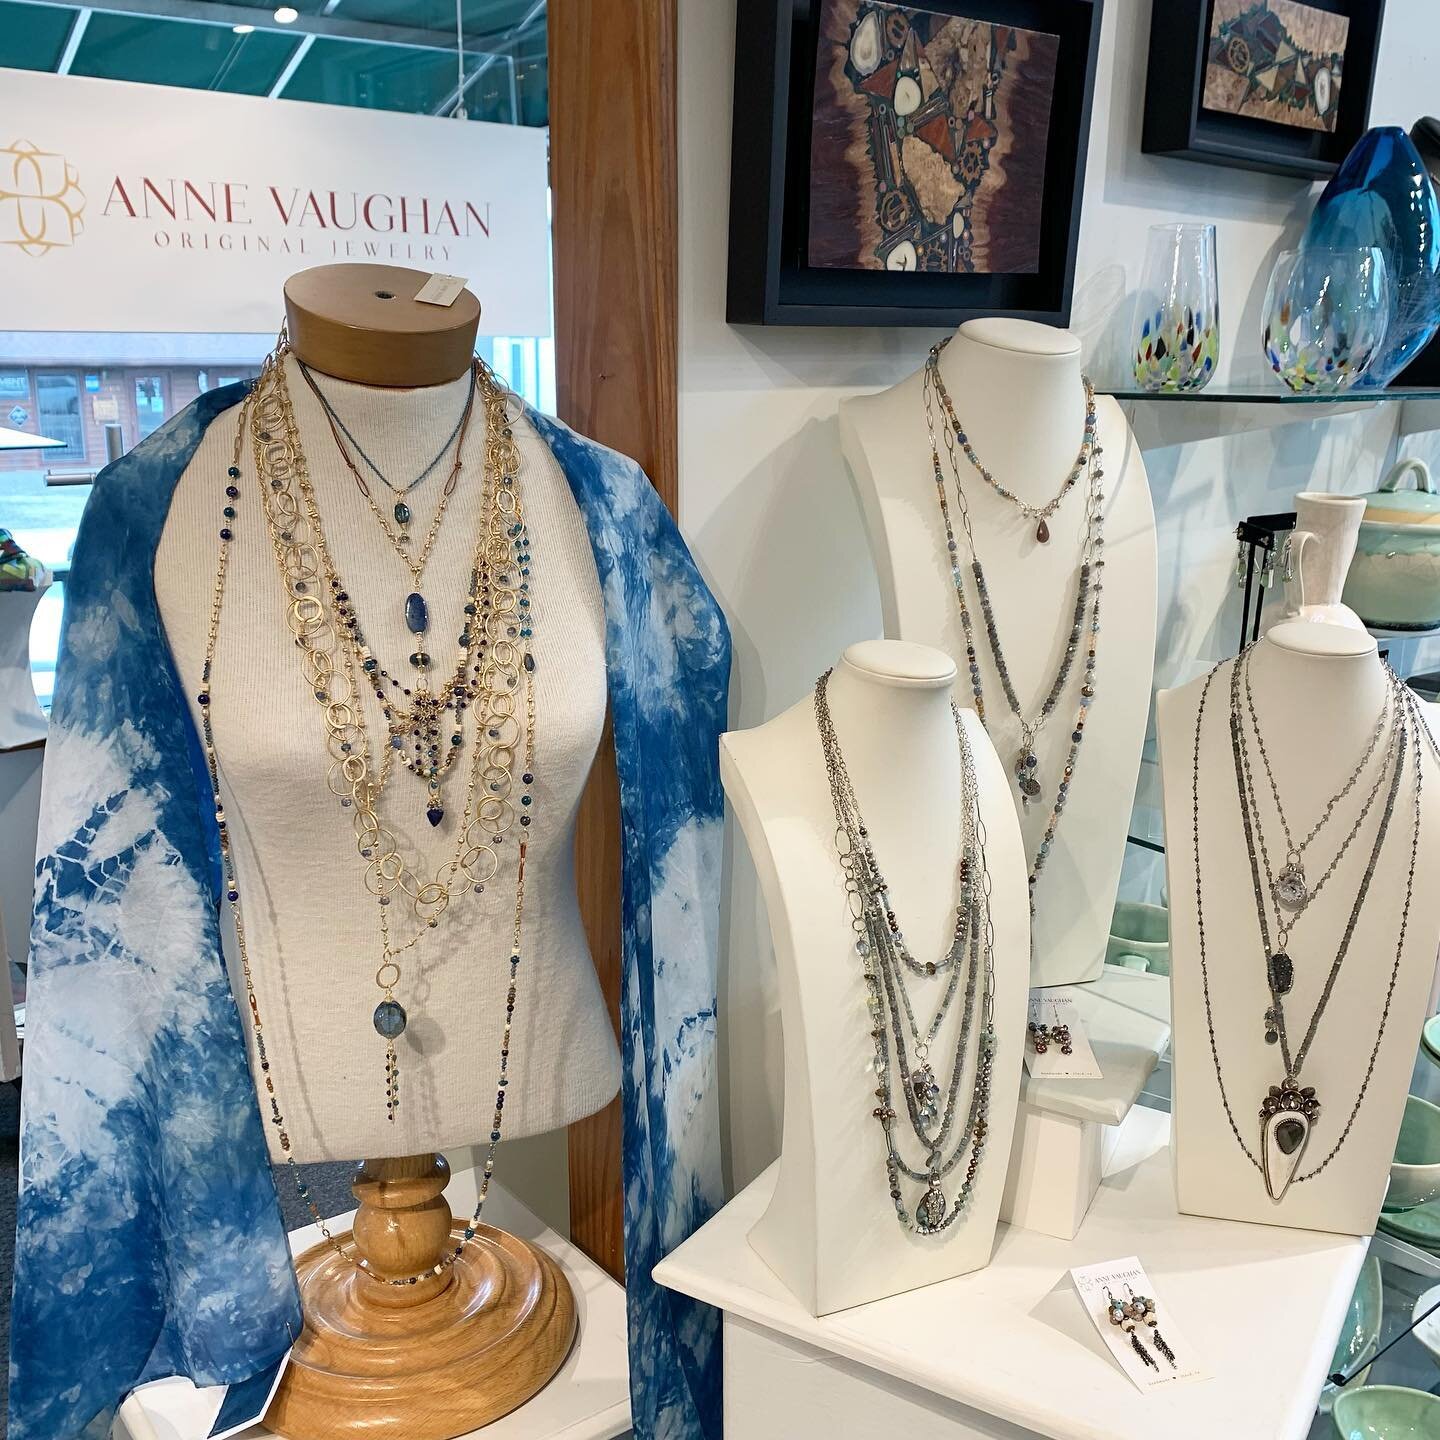 We are excited to announce that we will be having a sale this weekend on most Anne Vaughan Designs jewelry! This Friday March 31st - April 2nd we are offering 10% off on a large selection of @annevaughandesigns jewelry. I&rsquo;ve had many folks ask 